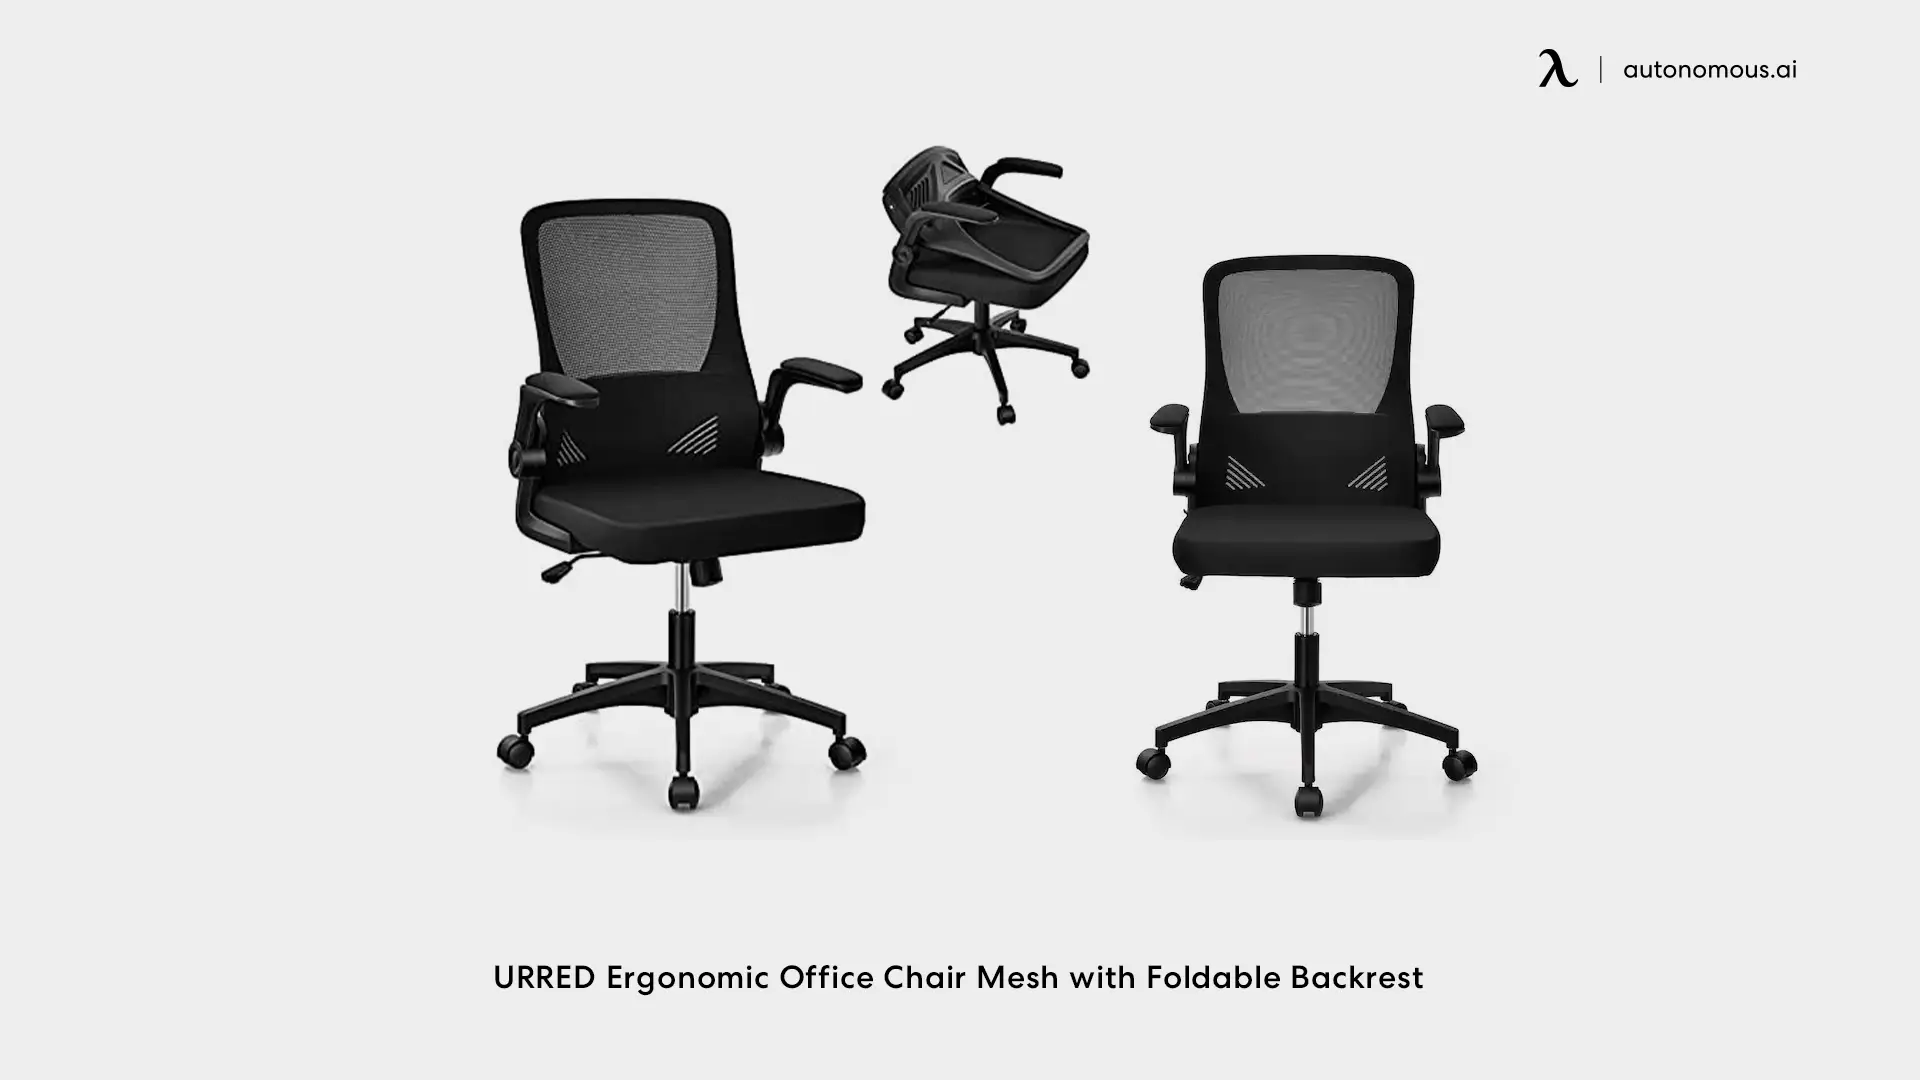 URRED Ergonomic Office Chair Mesh with Foldable Backrest